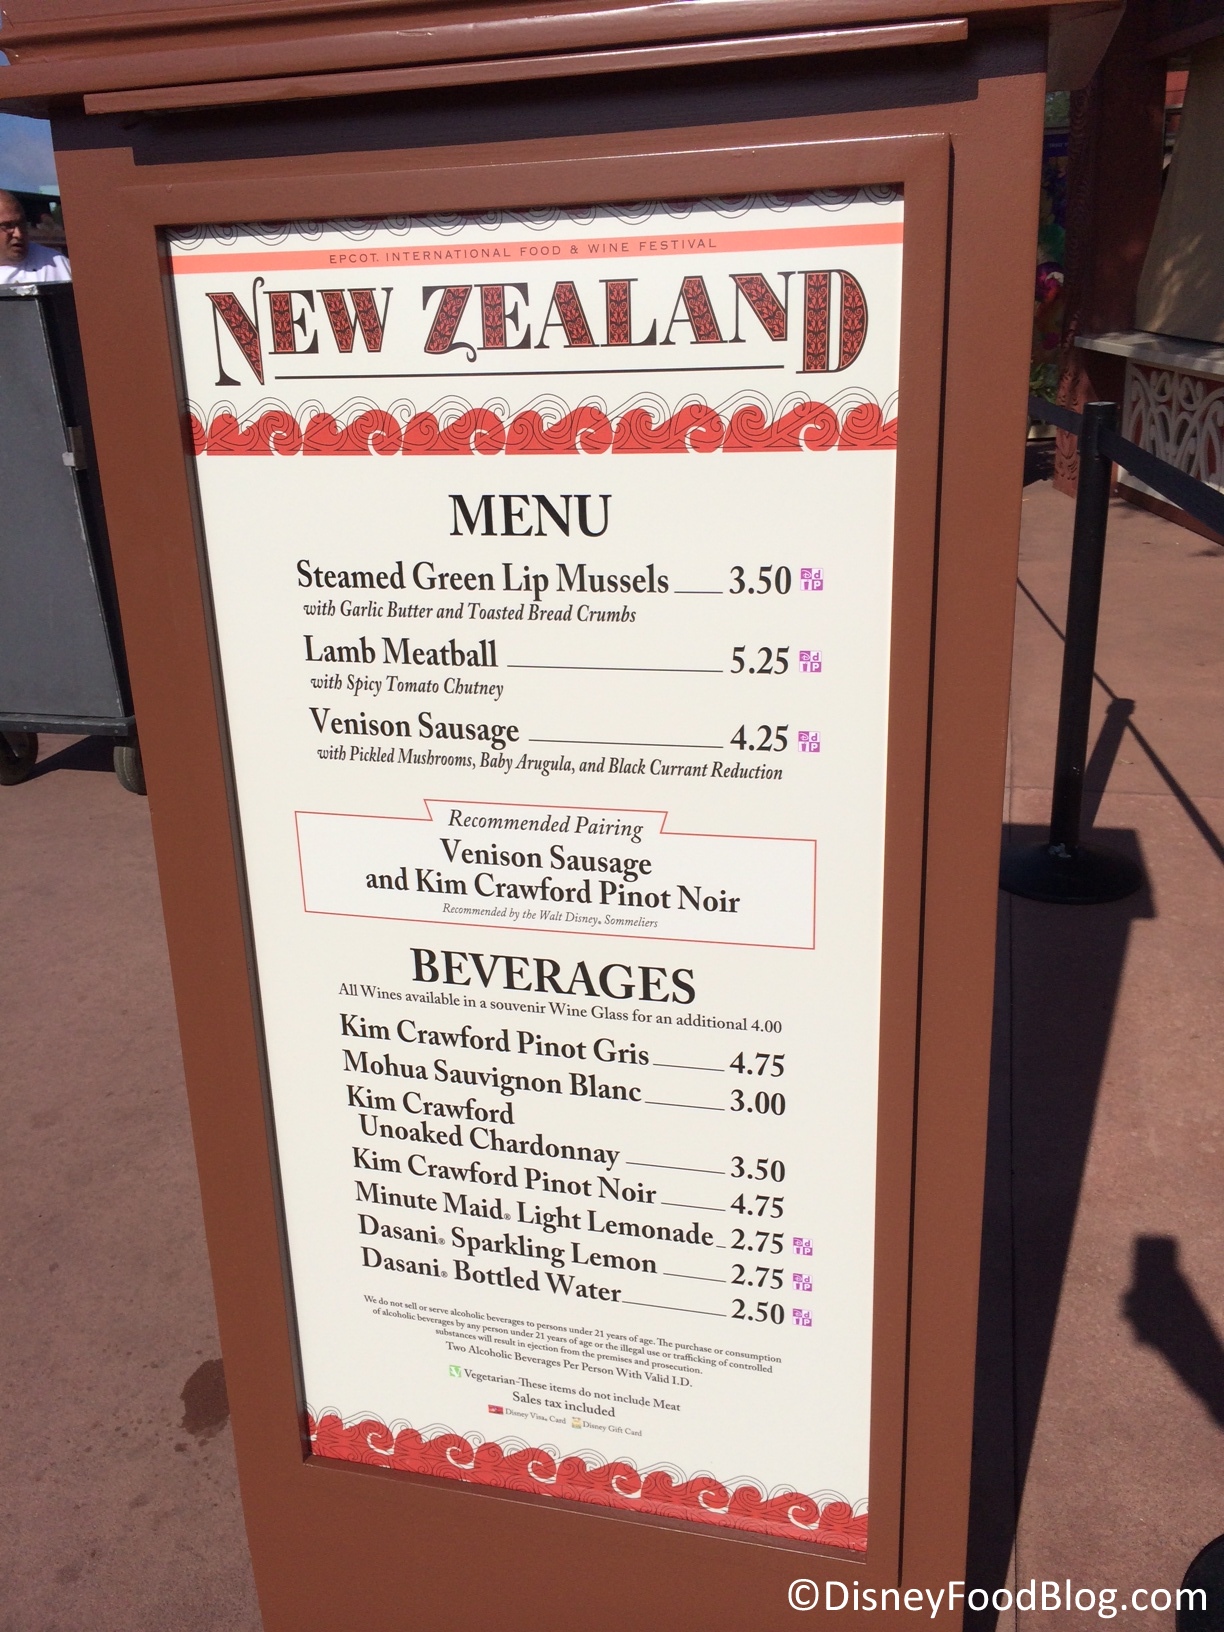 New Zealand: 2014 Epcot Food and Wine Festival | the disney food blog